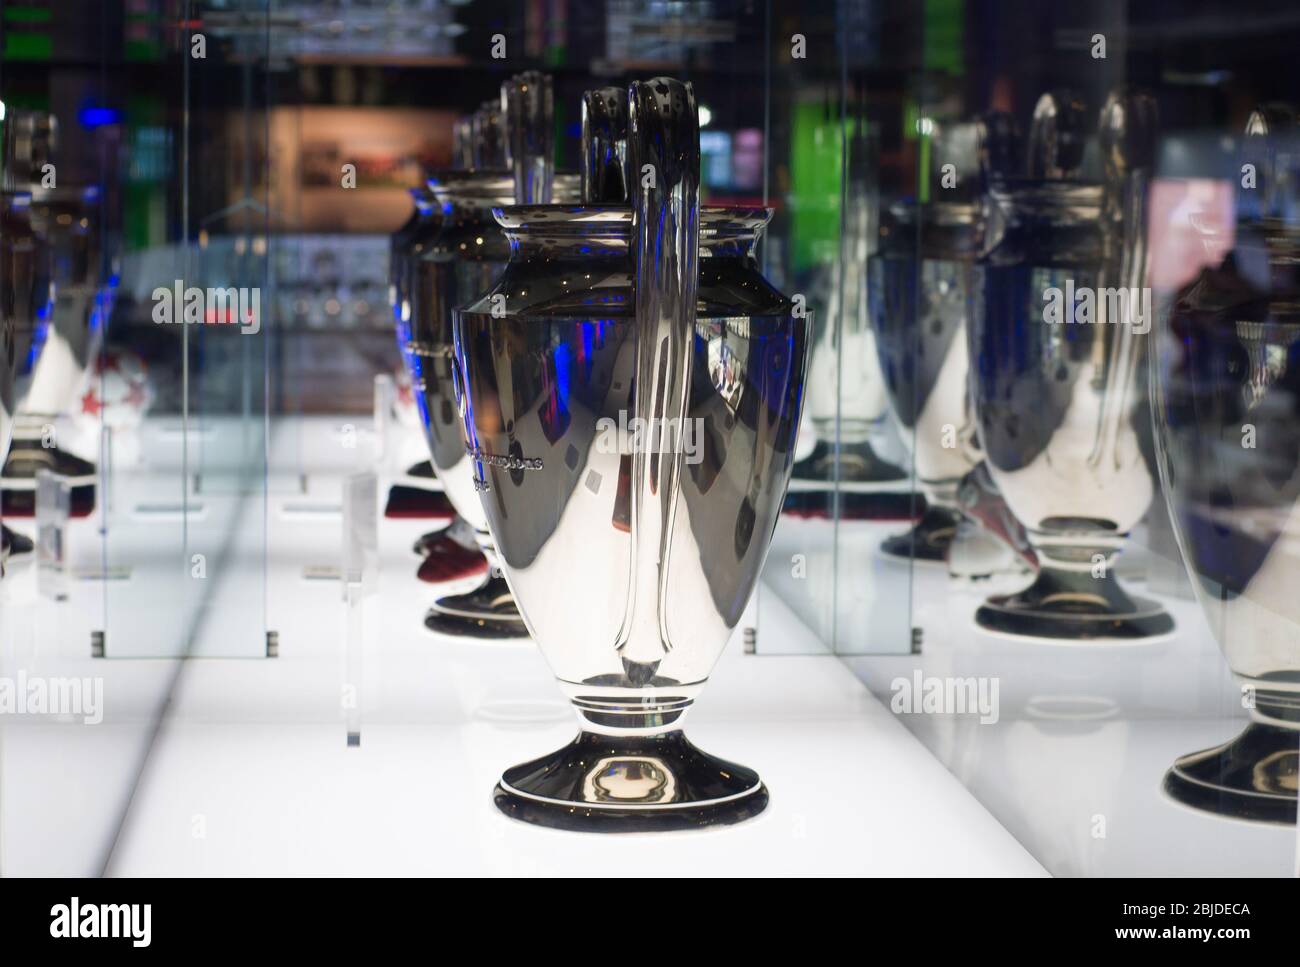 Barcelona, Spain - September 22, 2014: UEFA Champions League Cup in museum. UEFA Cup - trophy awarded annually by UEFA to the football club that wins Stock Photo